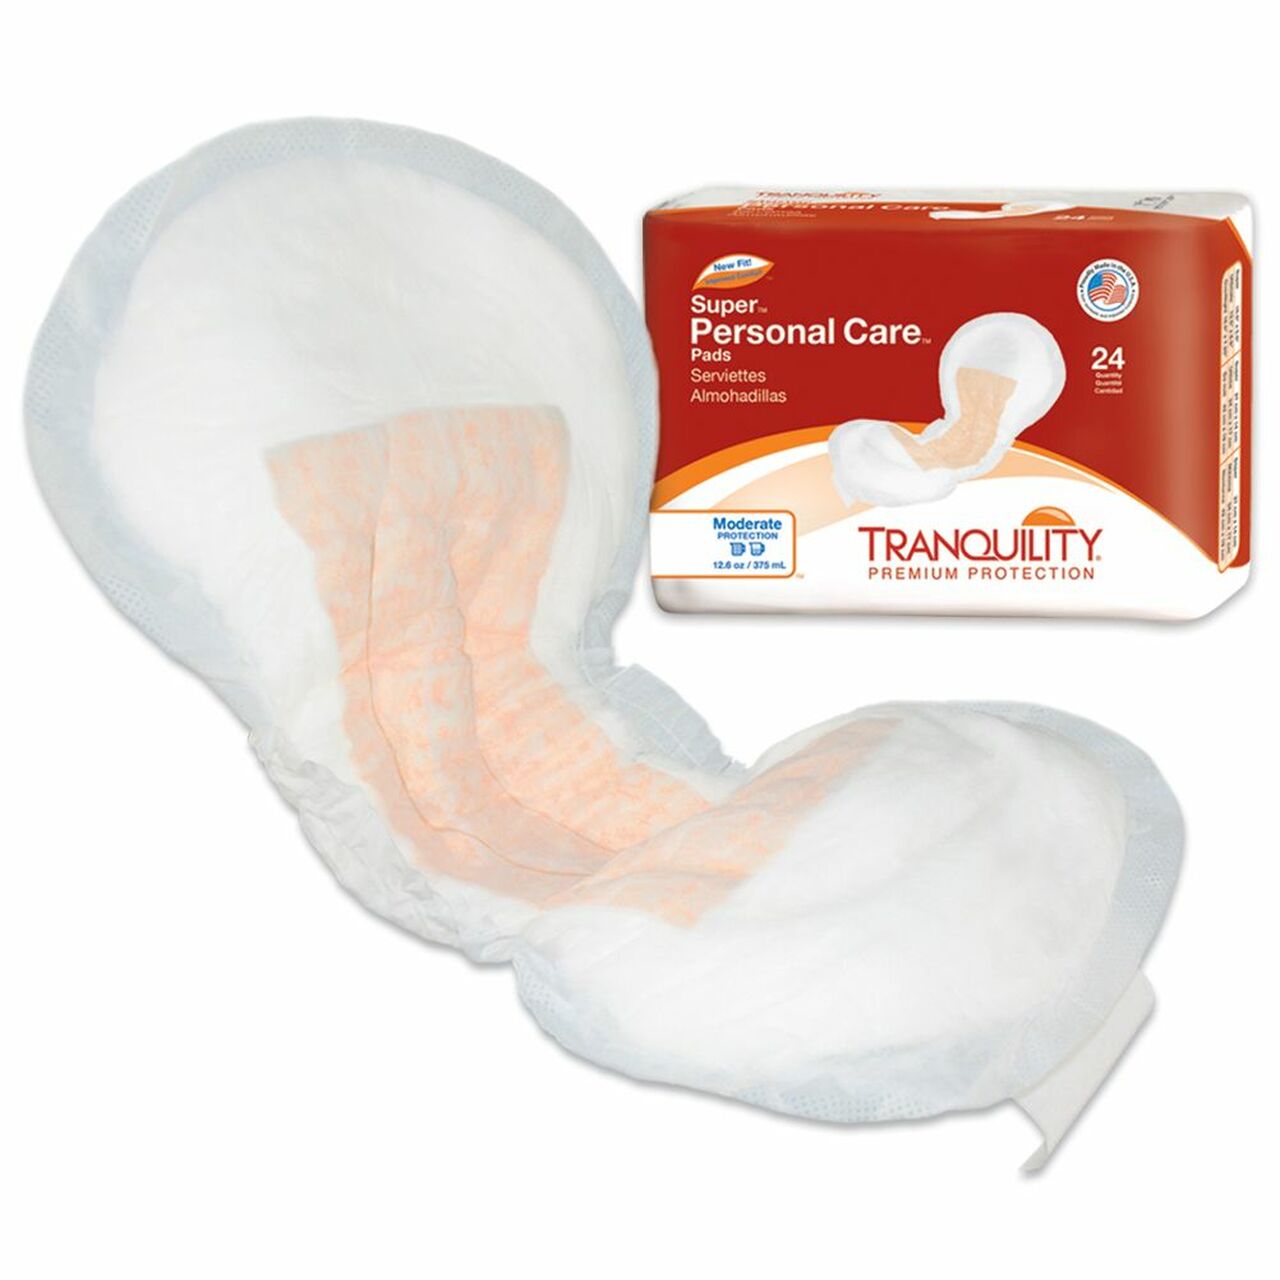 Tranquility Personal Incontinence Care Pads